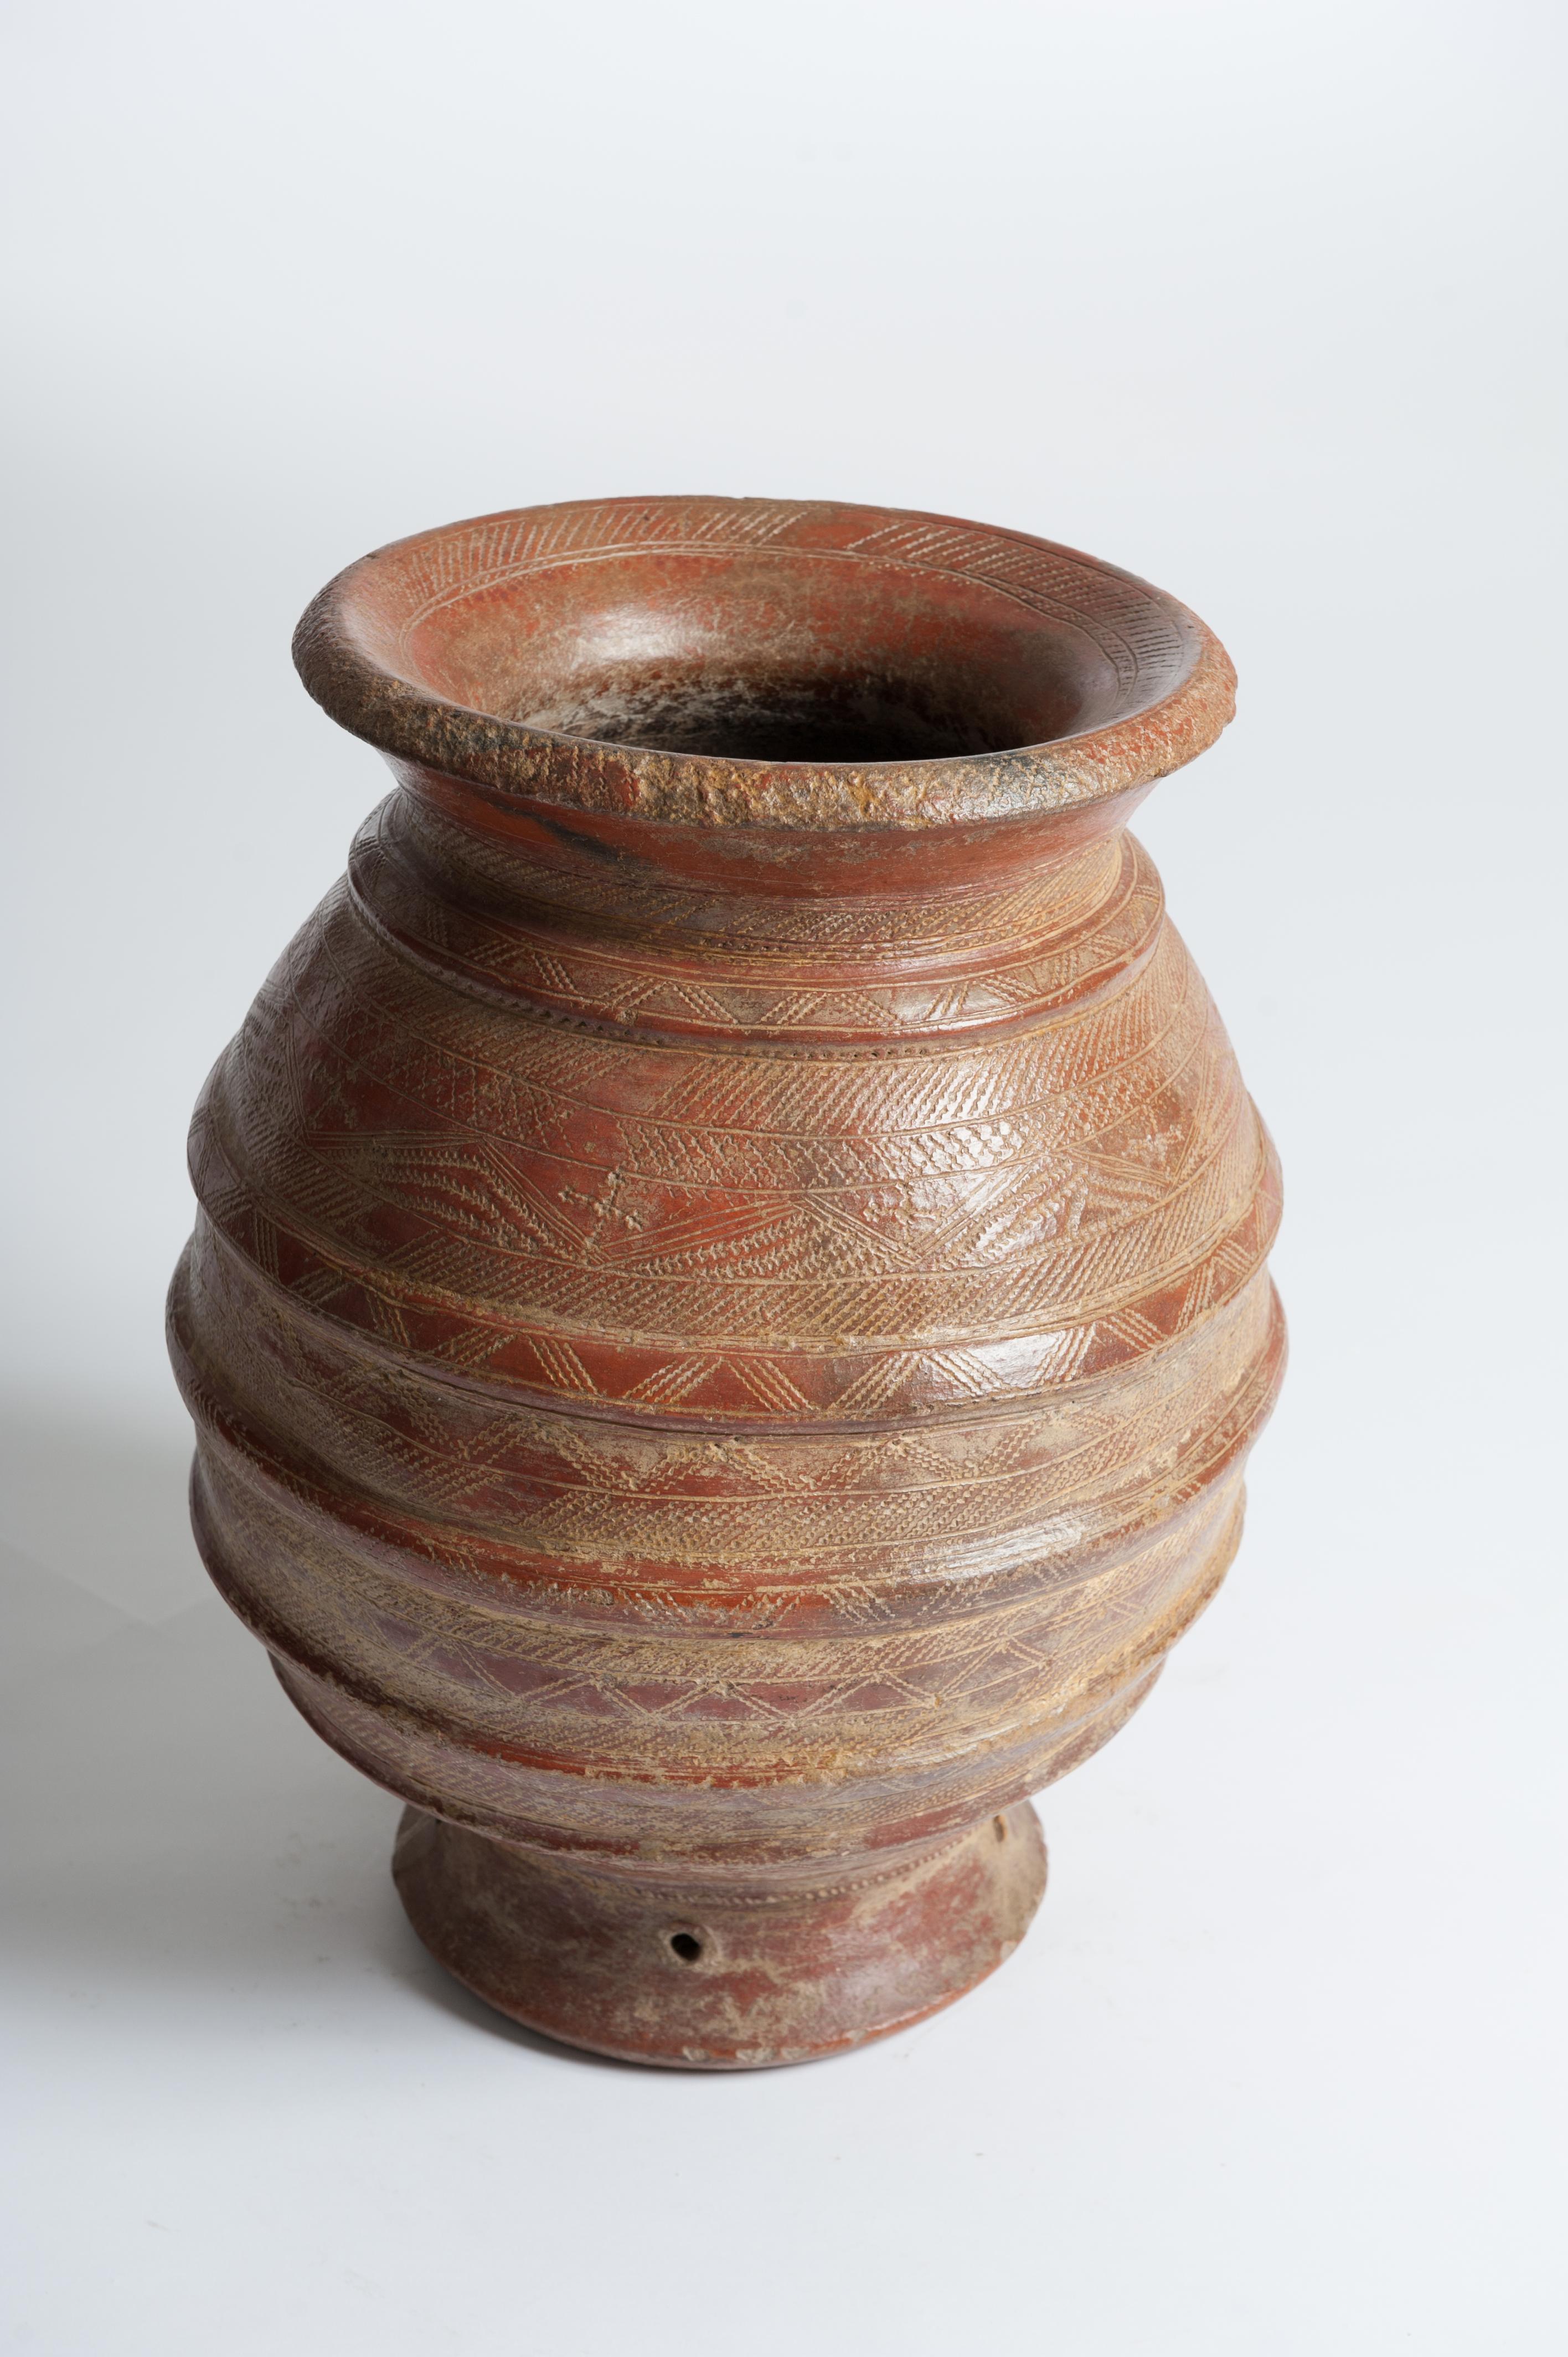 Hand-Crafted Unique Africain Tribal Midcentury Terracotta Storage Jar from Mali